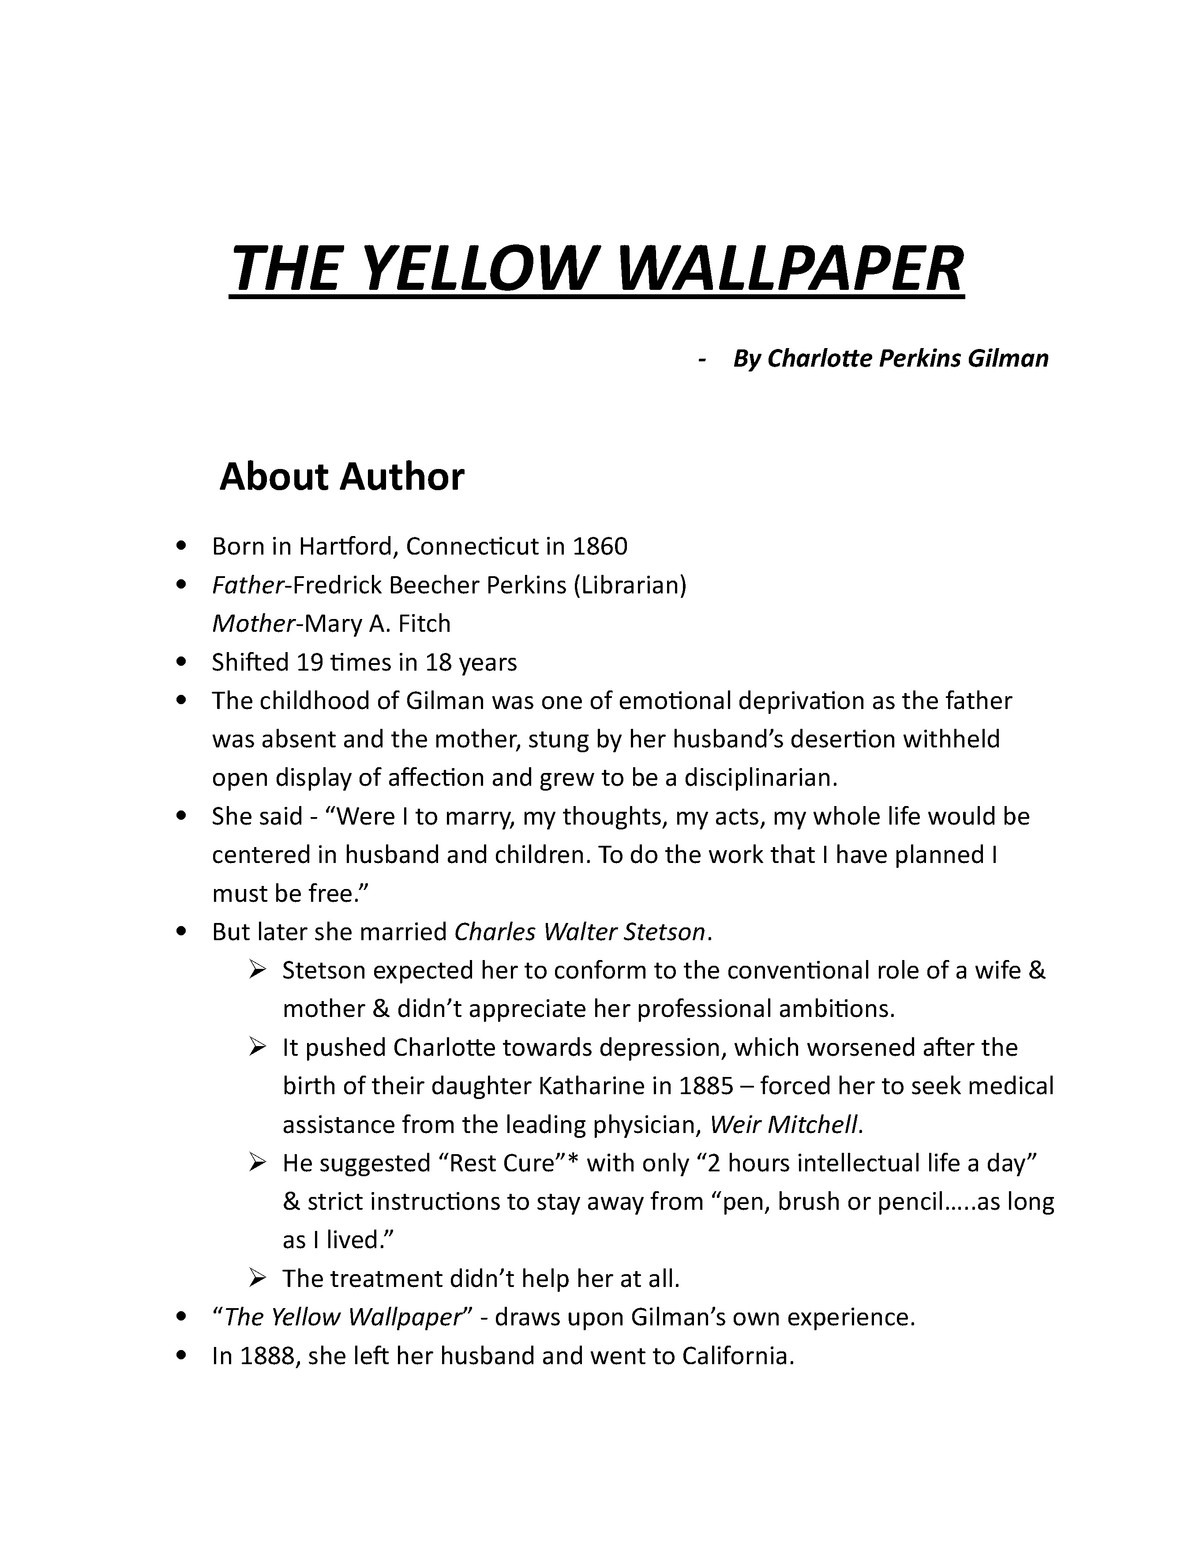 The Yellow Wallpaper Summary in a Plot Diagram